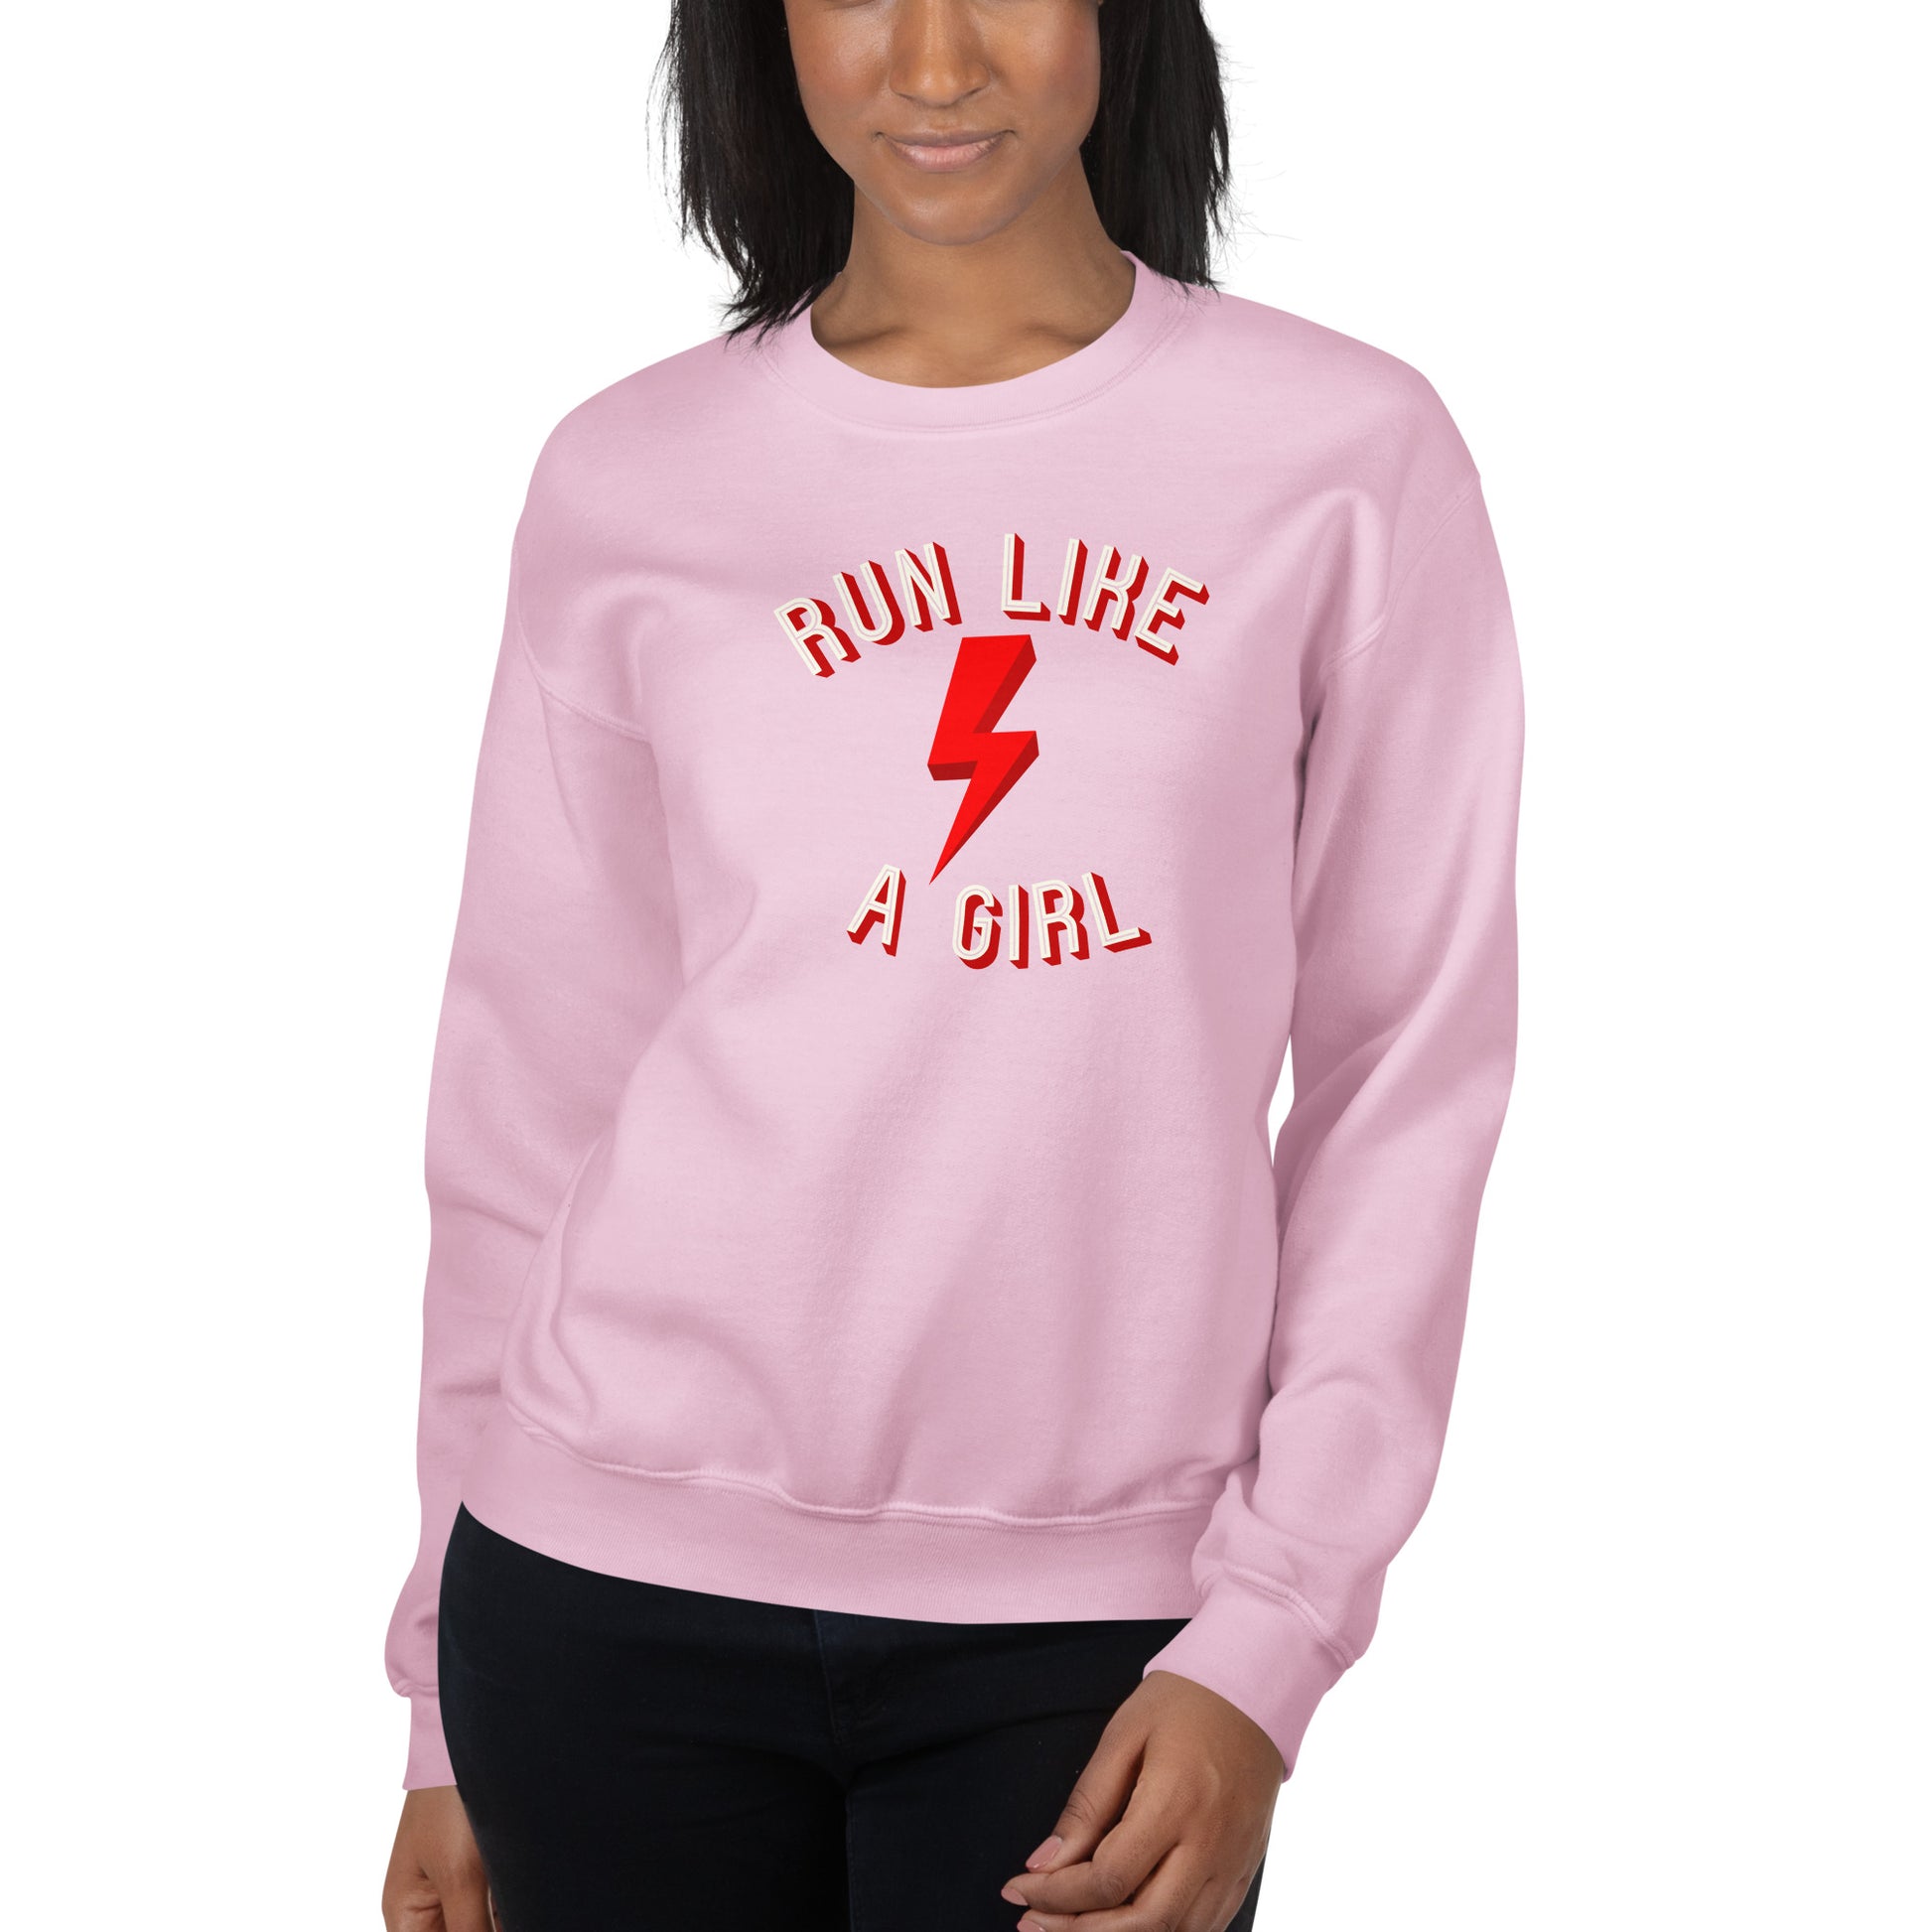 woman wearing a light pink sweatshirt with the words 'run like a girl' in a white and red font, wrapped around a red lightening bolt